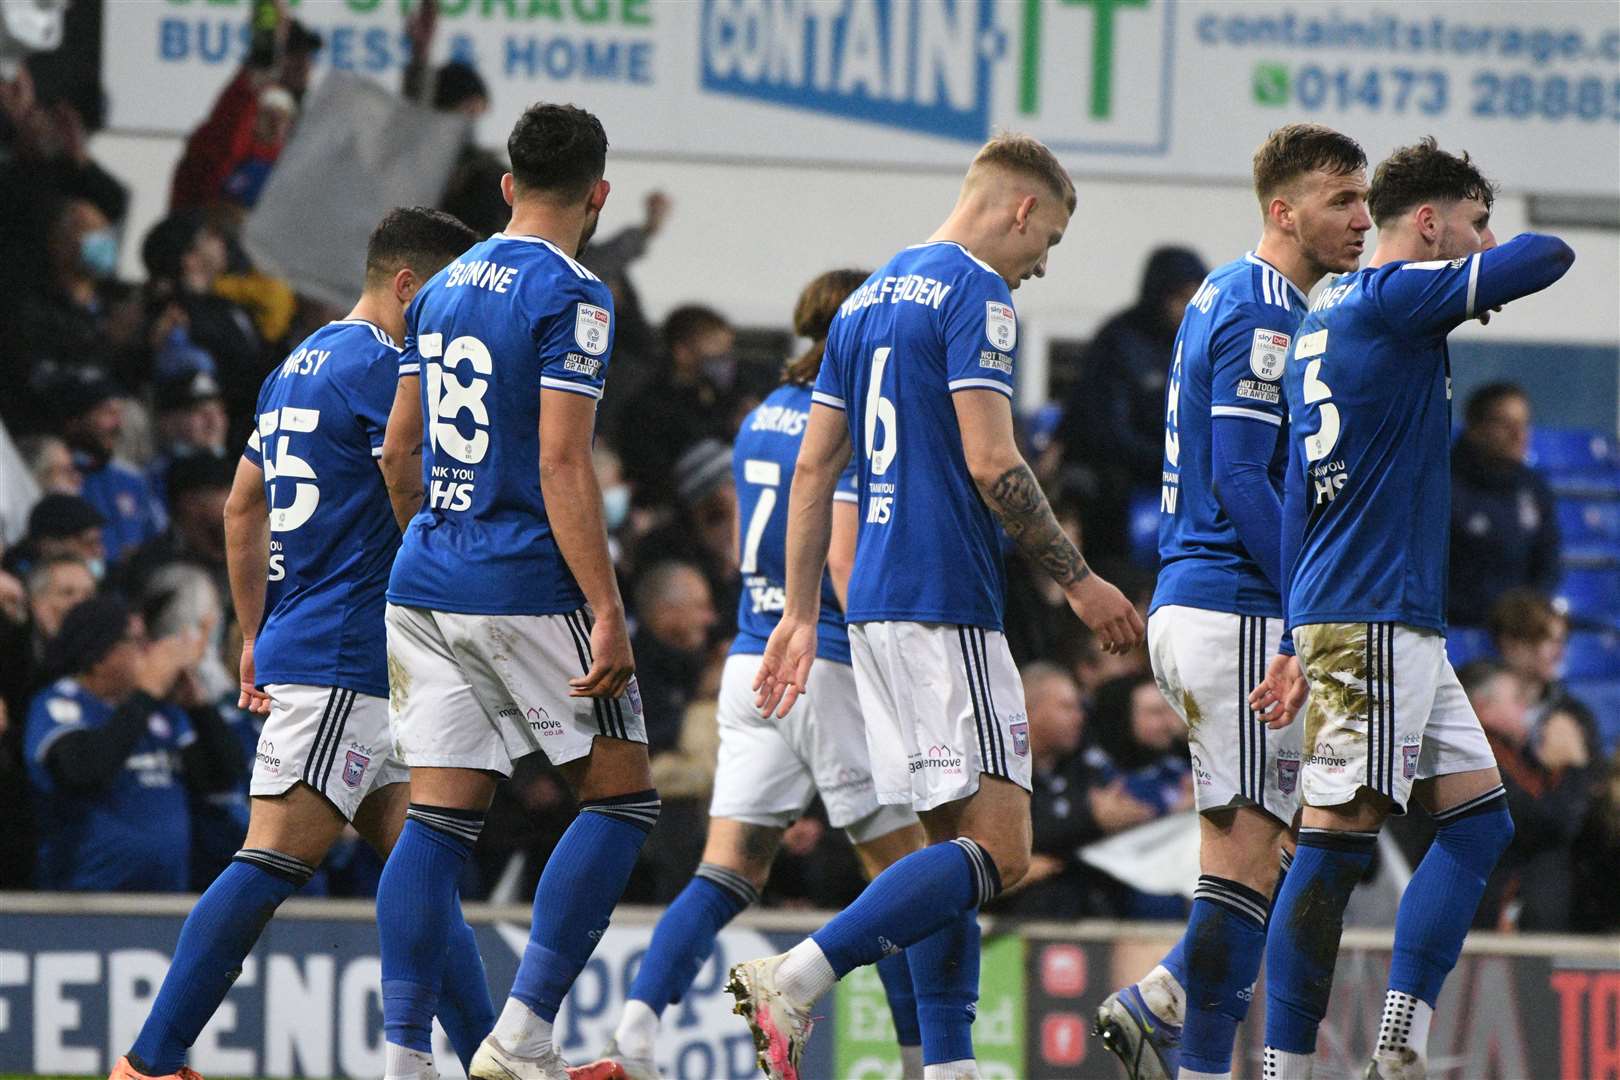 Ipswich Town will be backed by over 2,000 fans at Priestfield Picture: Barry Goodwin